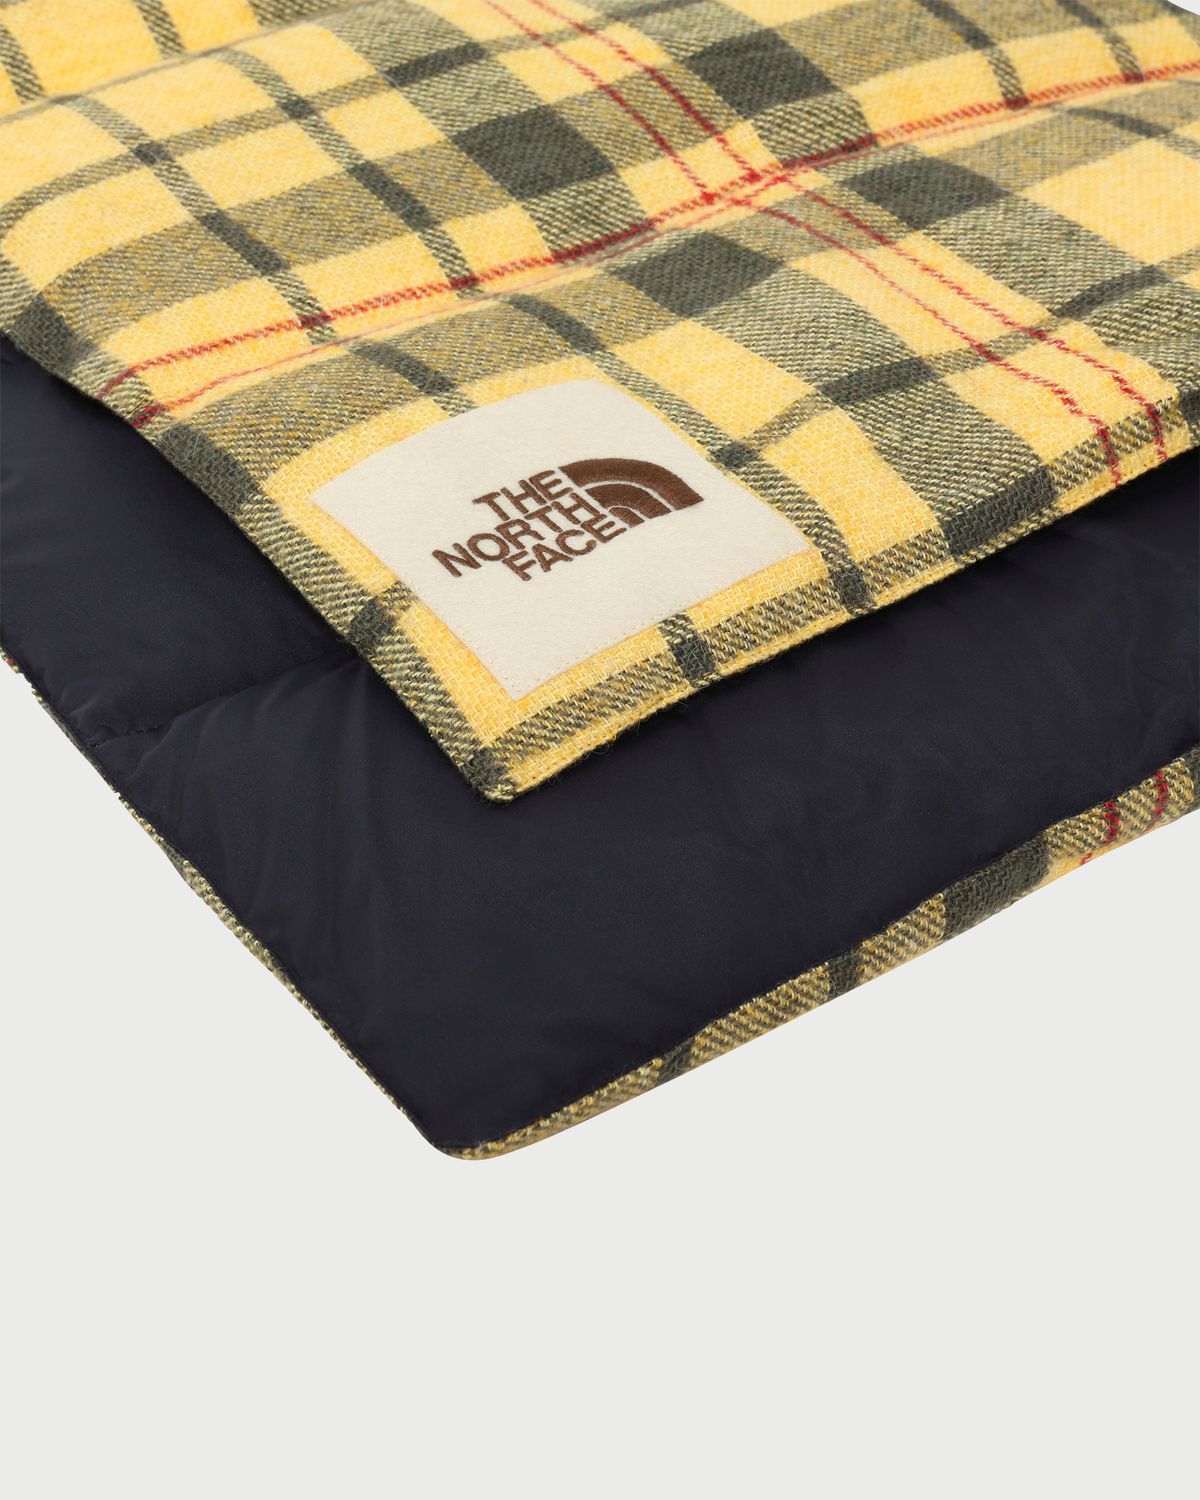 The North Face – Brown Label Insulated Scarf Summer Gold Heritage Unisex - Knits - Yellow - Image 2